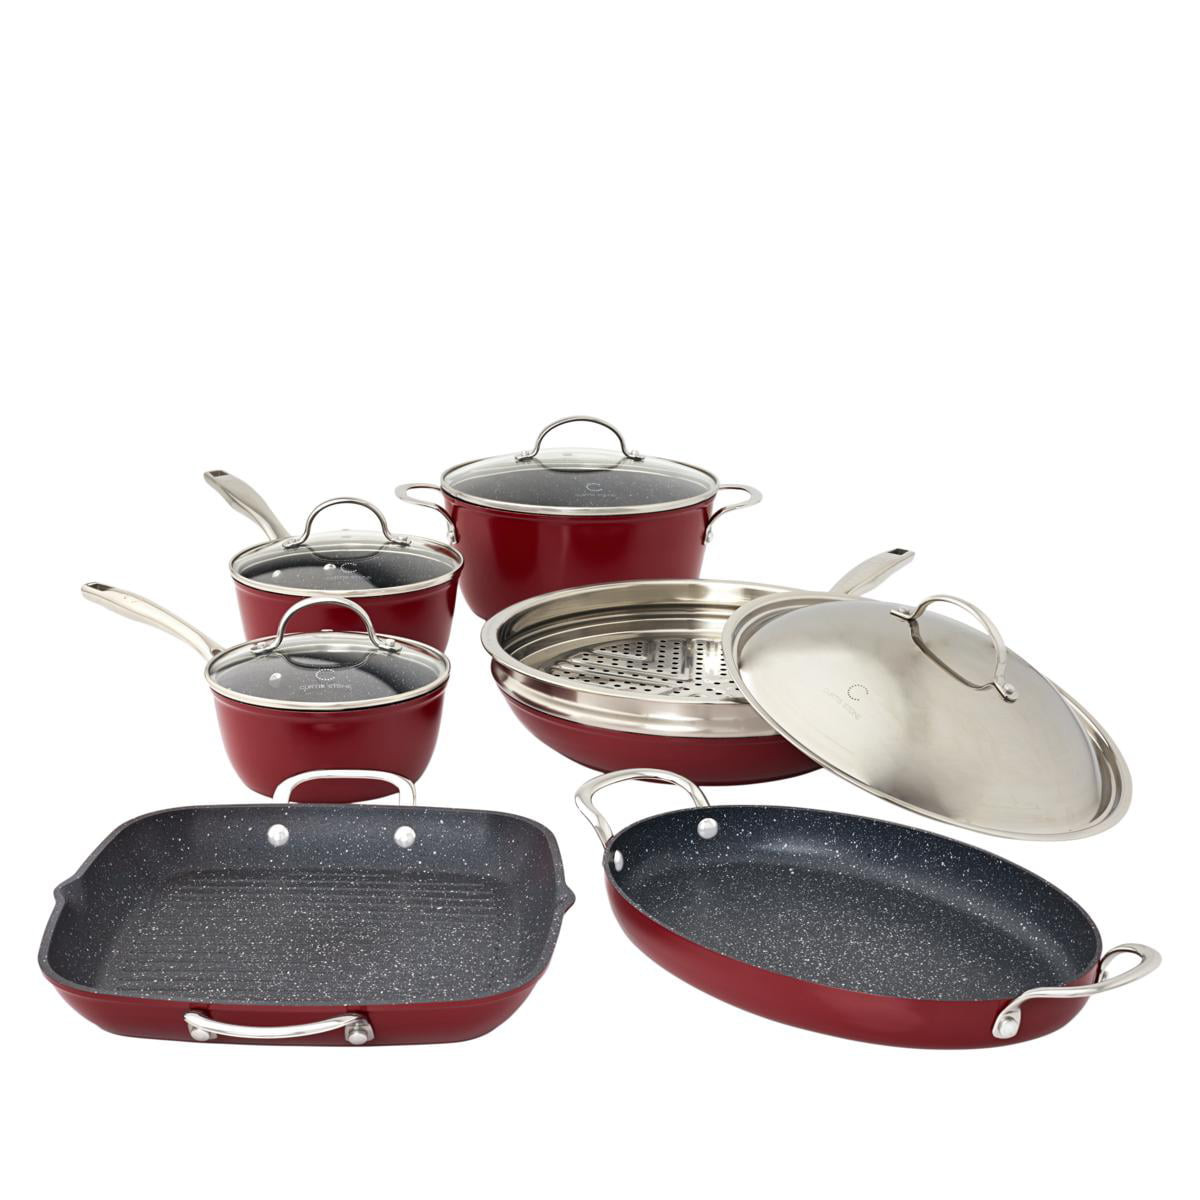 Curtis Stone Dura-Pan Nonstick 8-piece Cookware Set Model 650-334-Used 